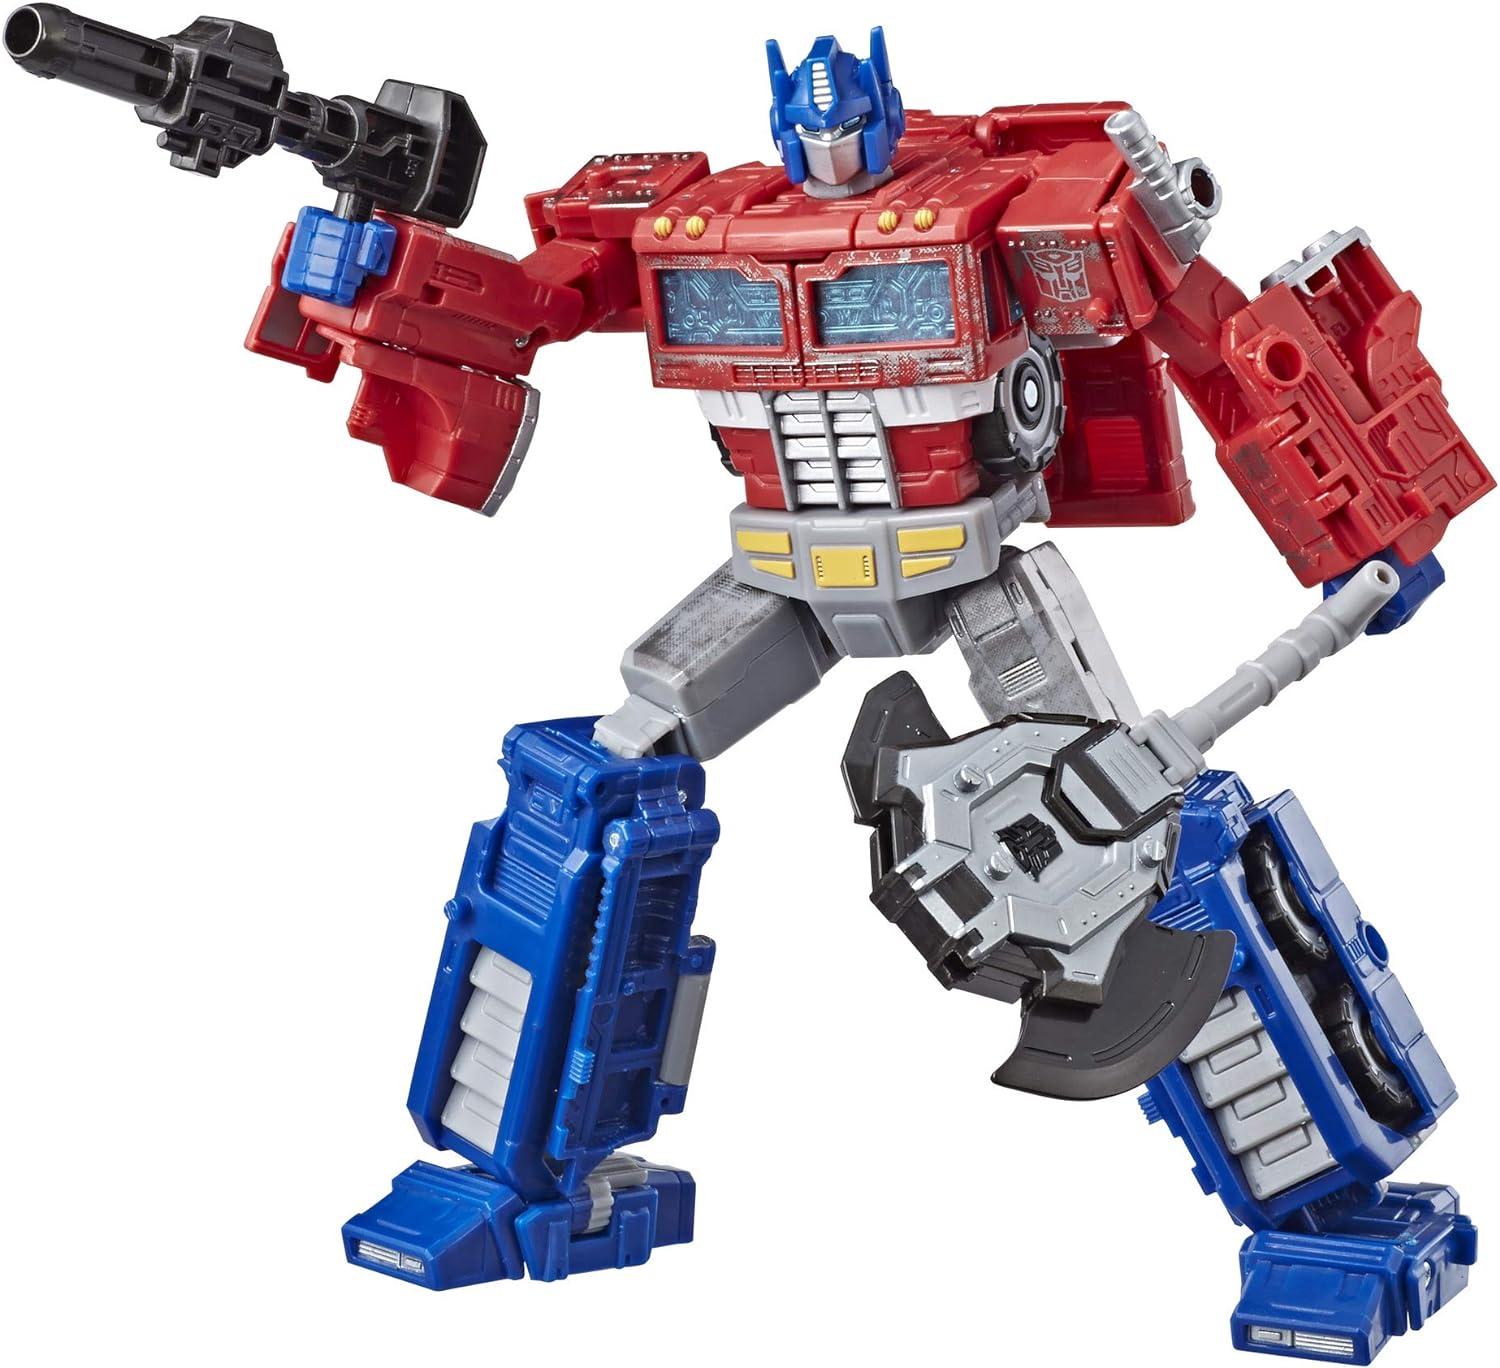 Transformers Generations War for Cybertron Siege Voyager Action Figure for $23.99